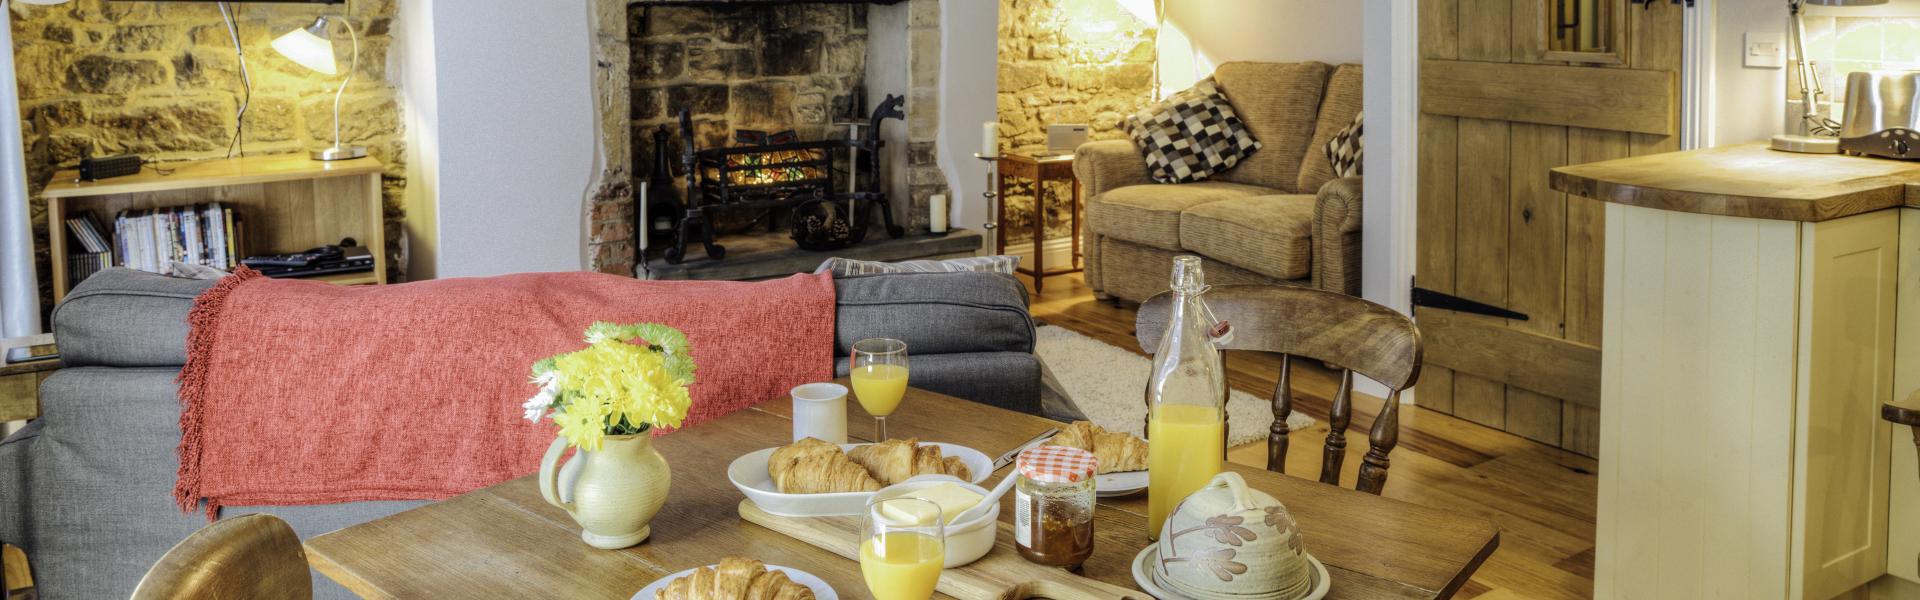 Bed and Breakfast Accommodation in Burgundy - HomeToGo